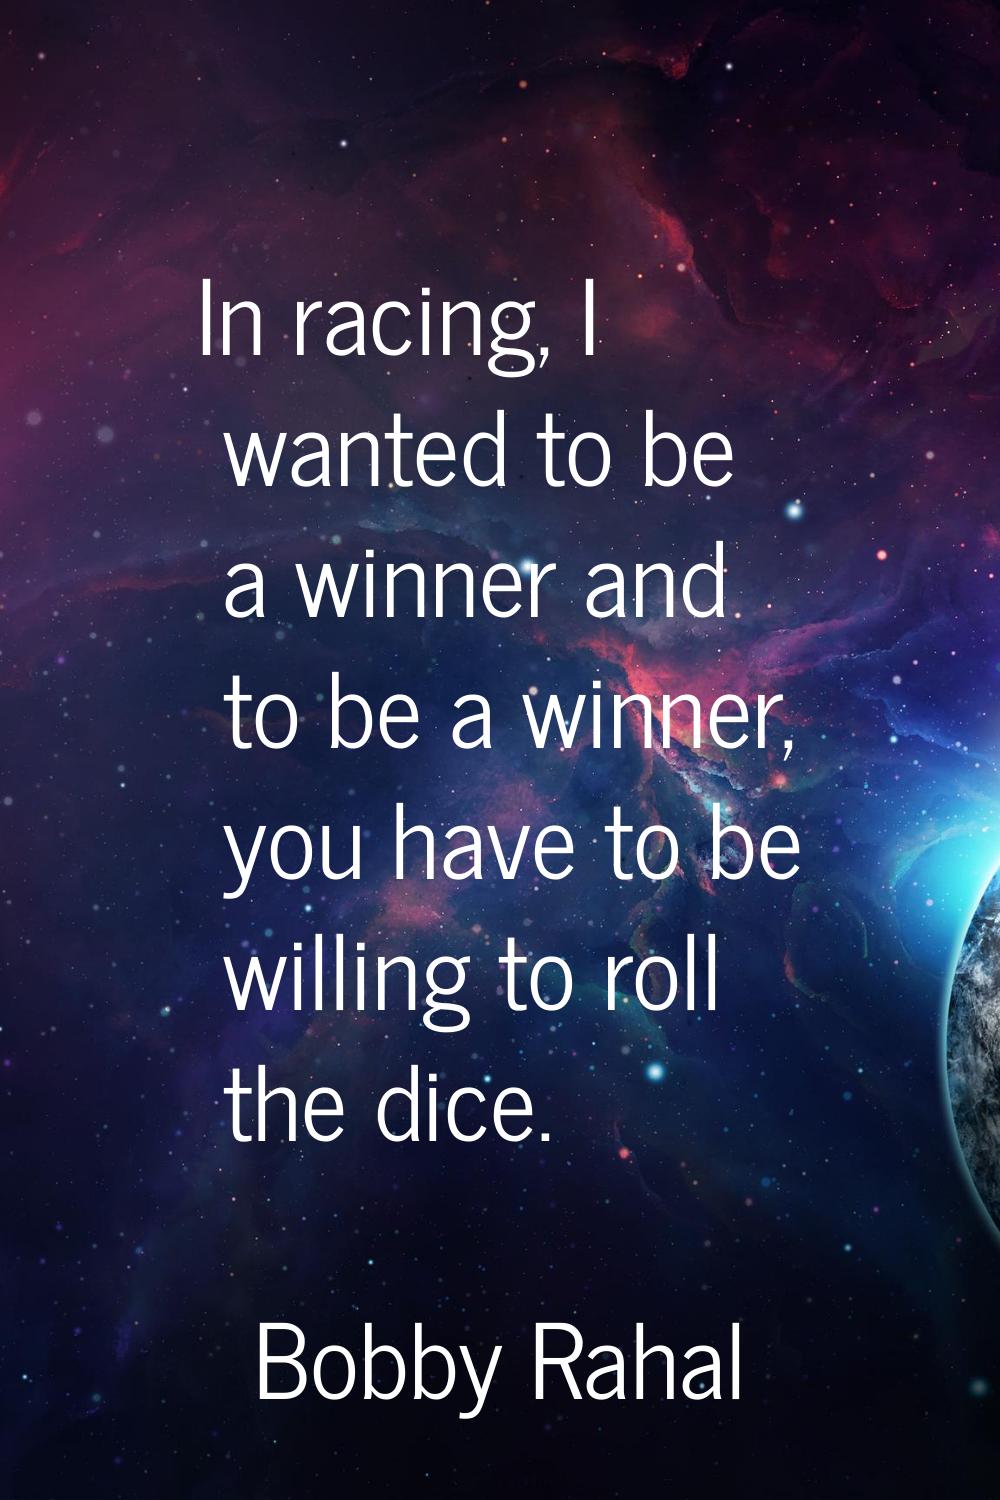 In racing, I wanted to be a winner and to be a winner, you have to be willing to roll the dice.